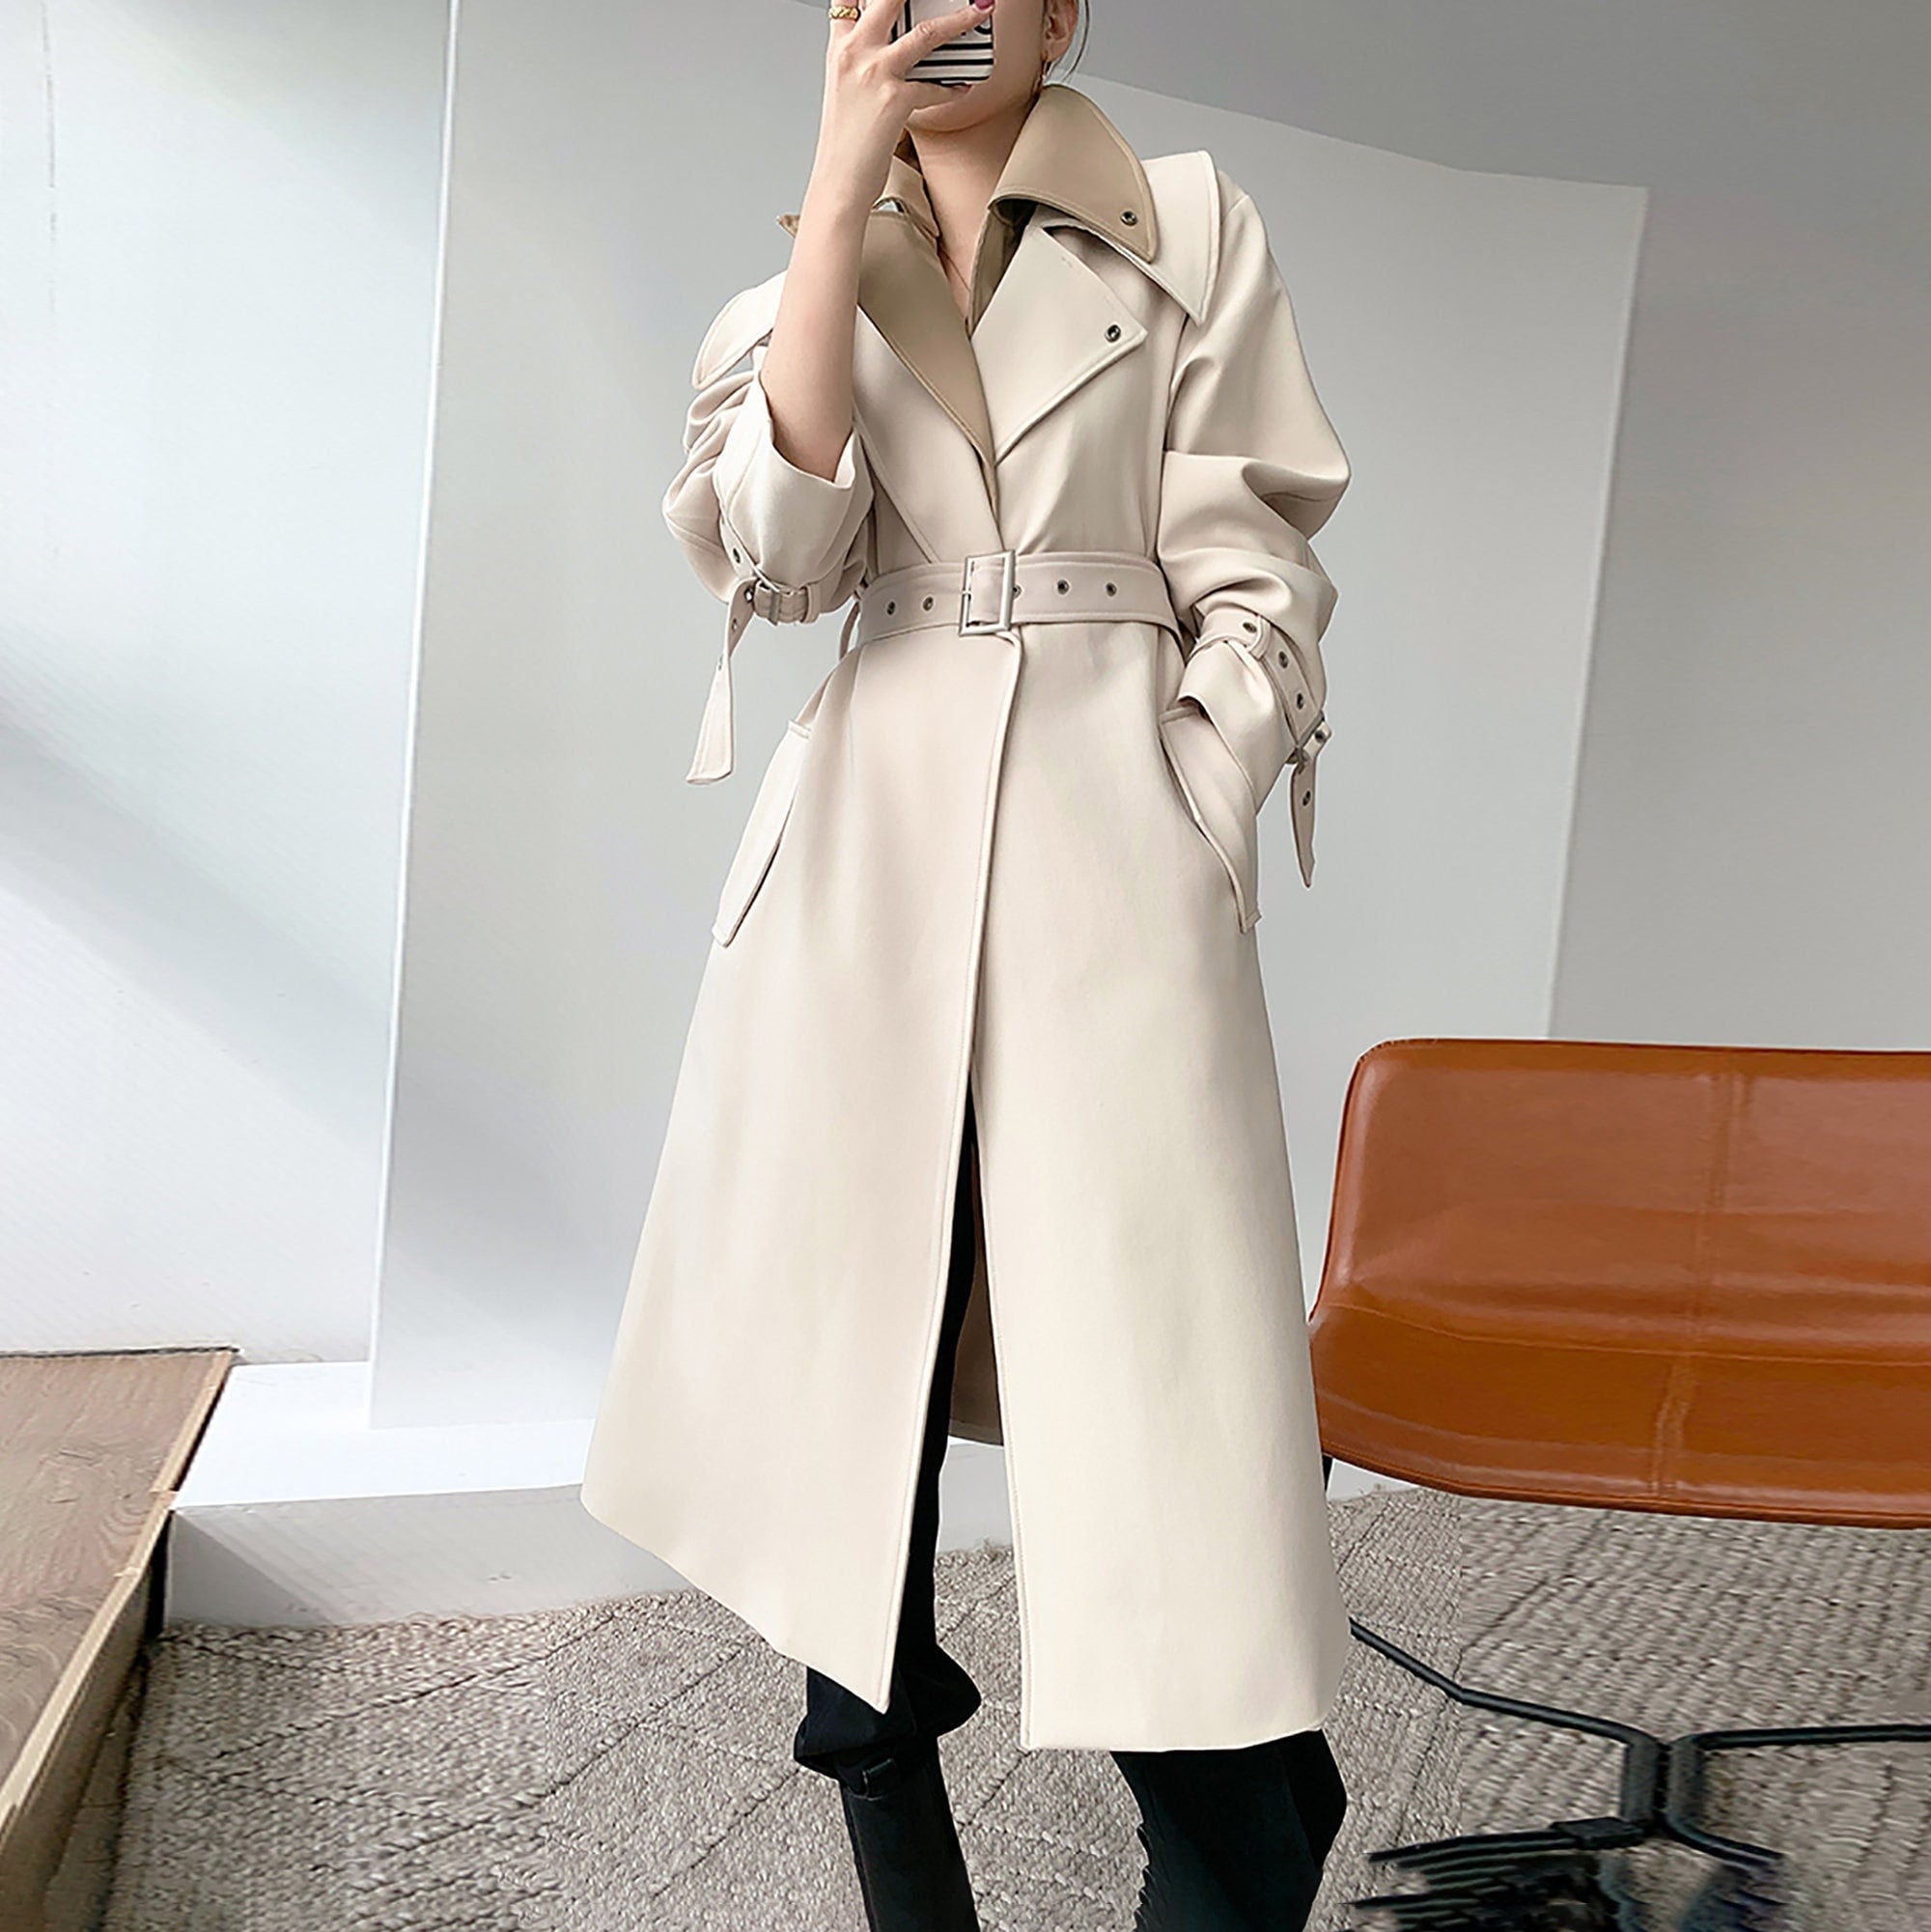 Her lip to Belted Dress Trench Coat M-